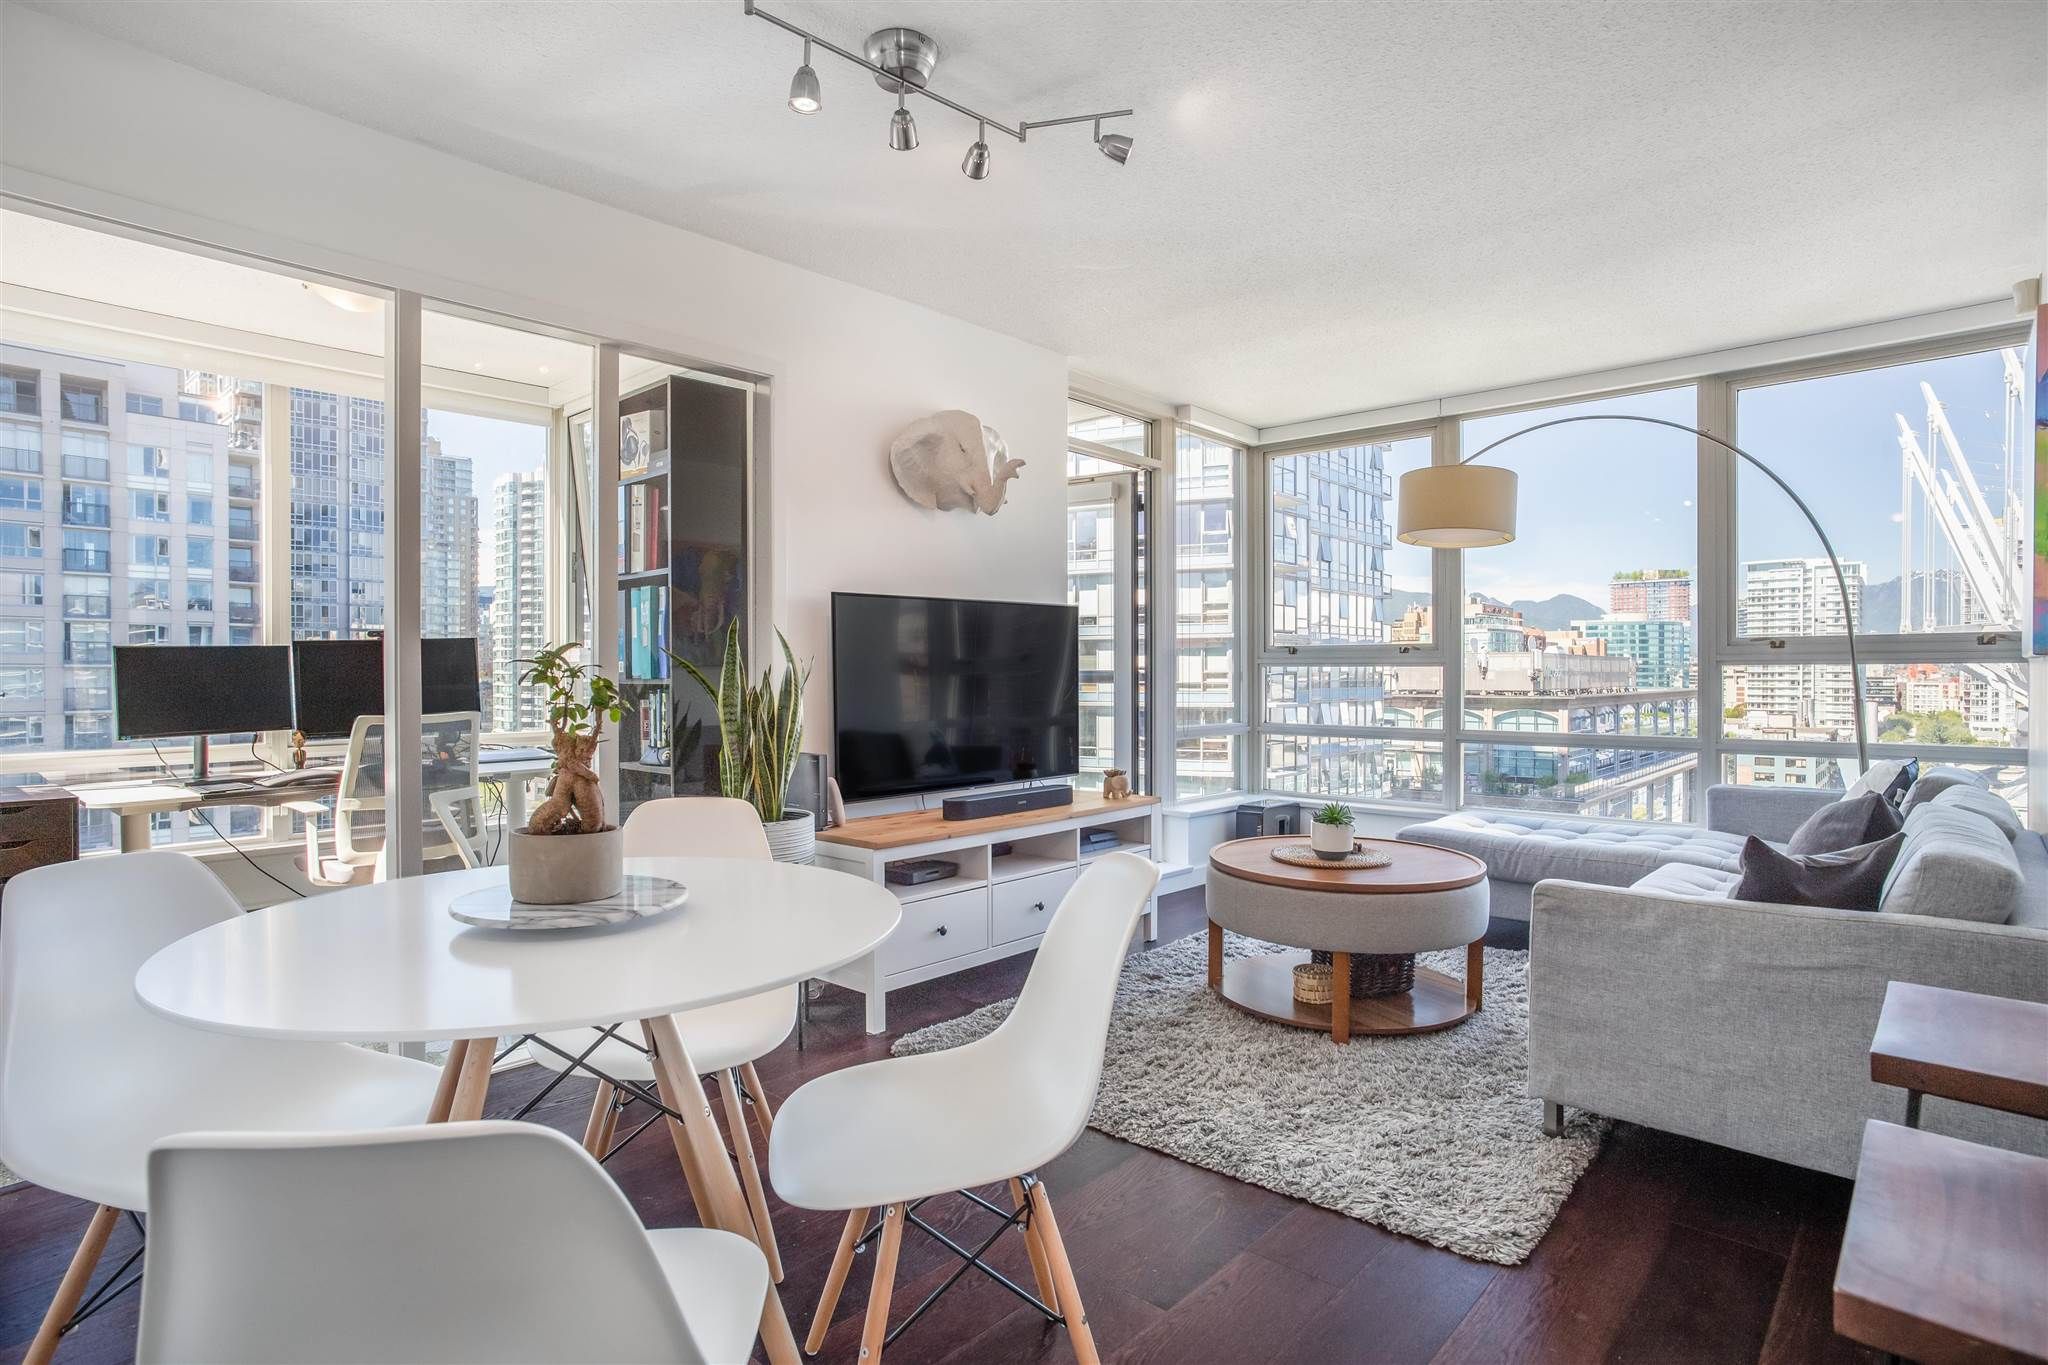 Main Photo: 1808 939 EXPO BOULEVARD in Vancouver: Yaletown Condo for sale (Vancouver West)  : MLS®# R2603563